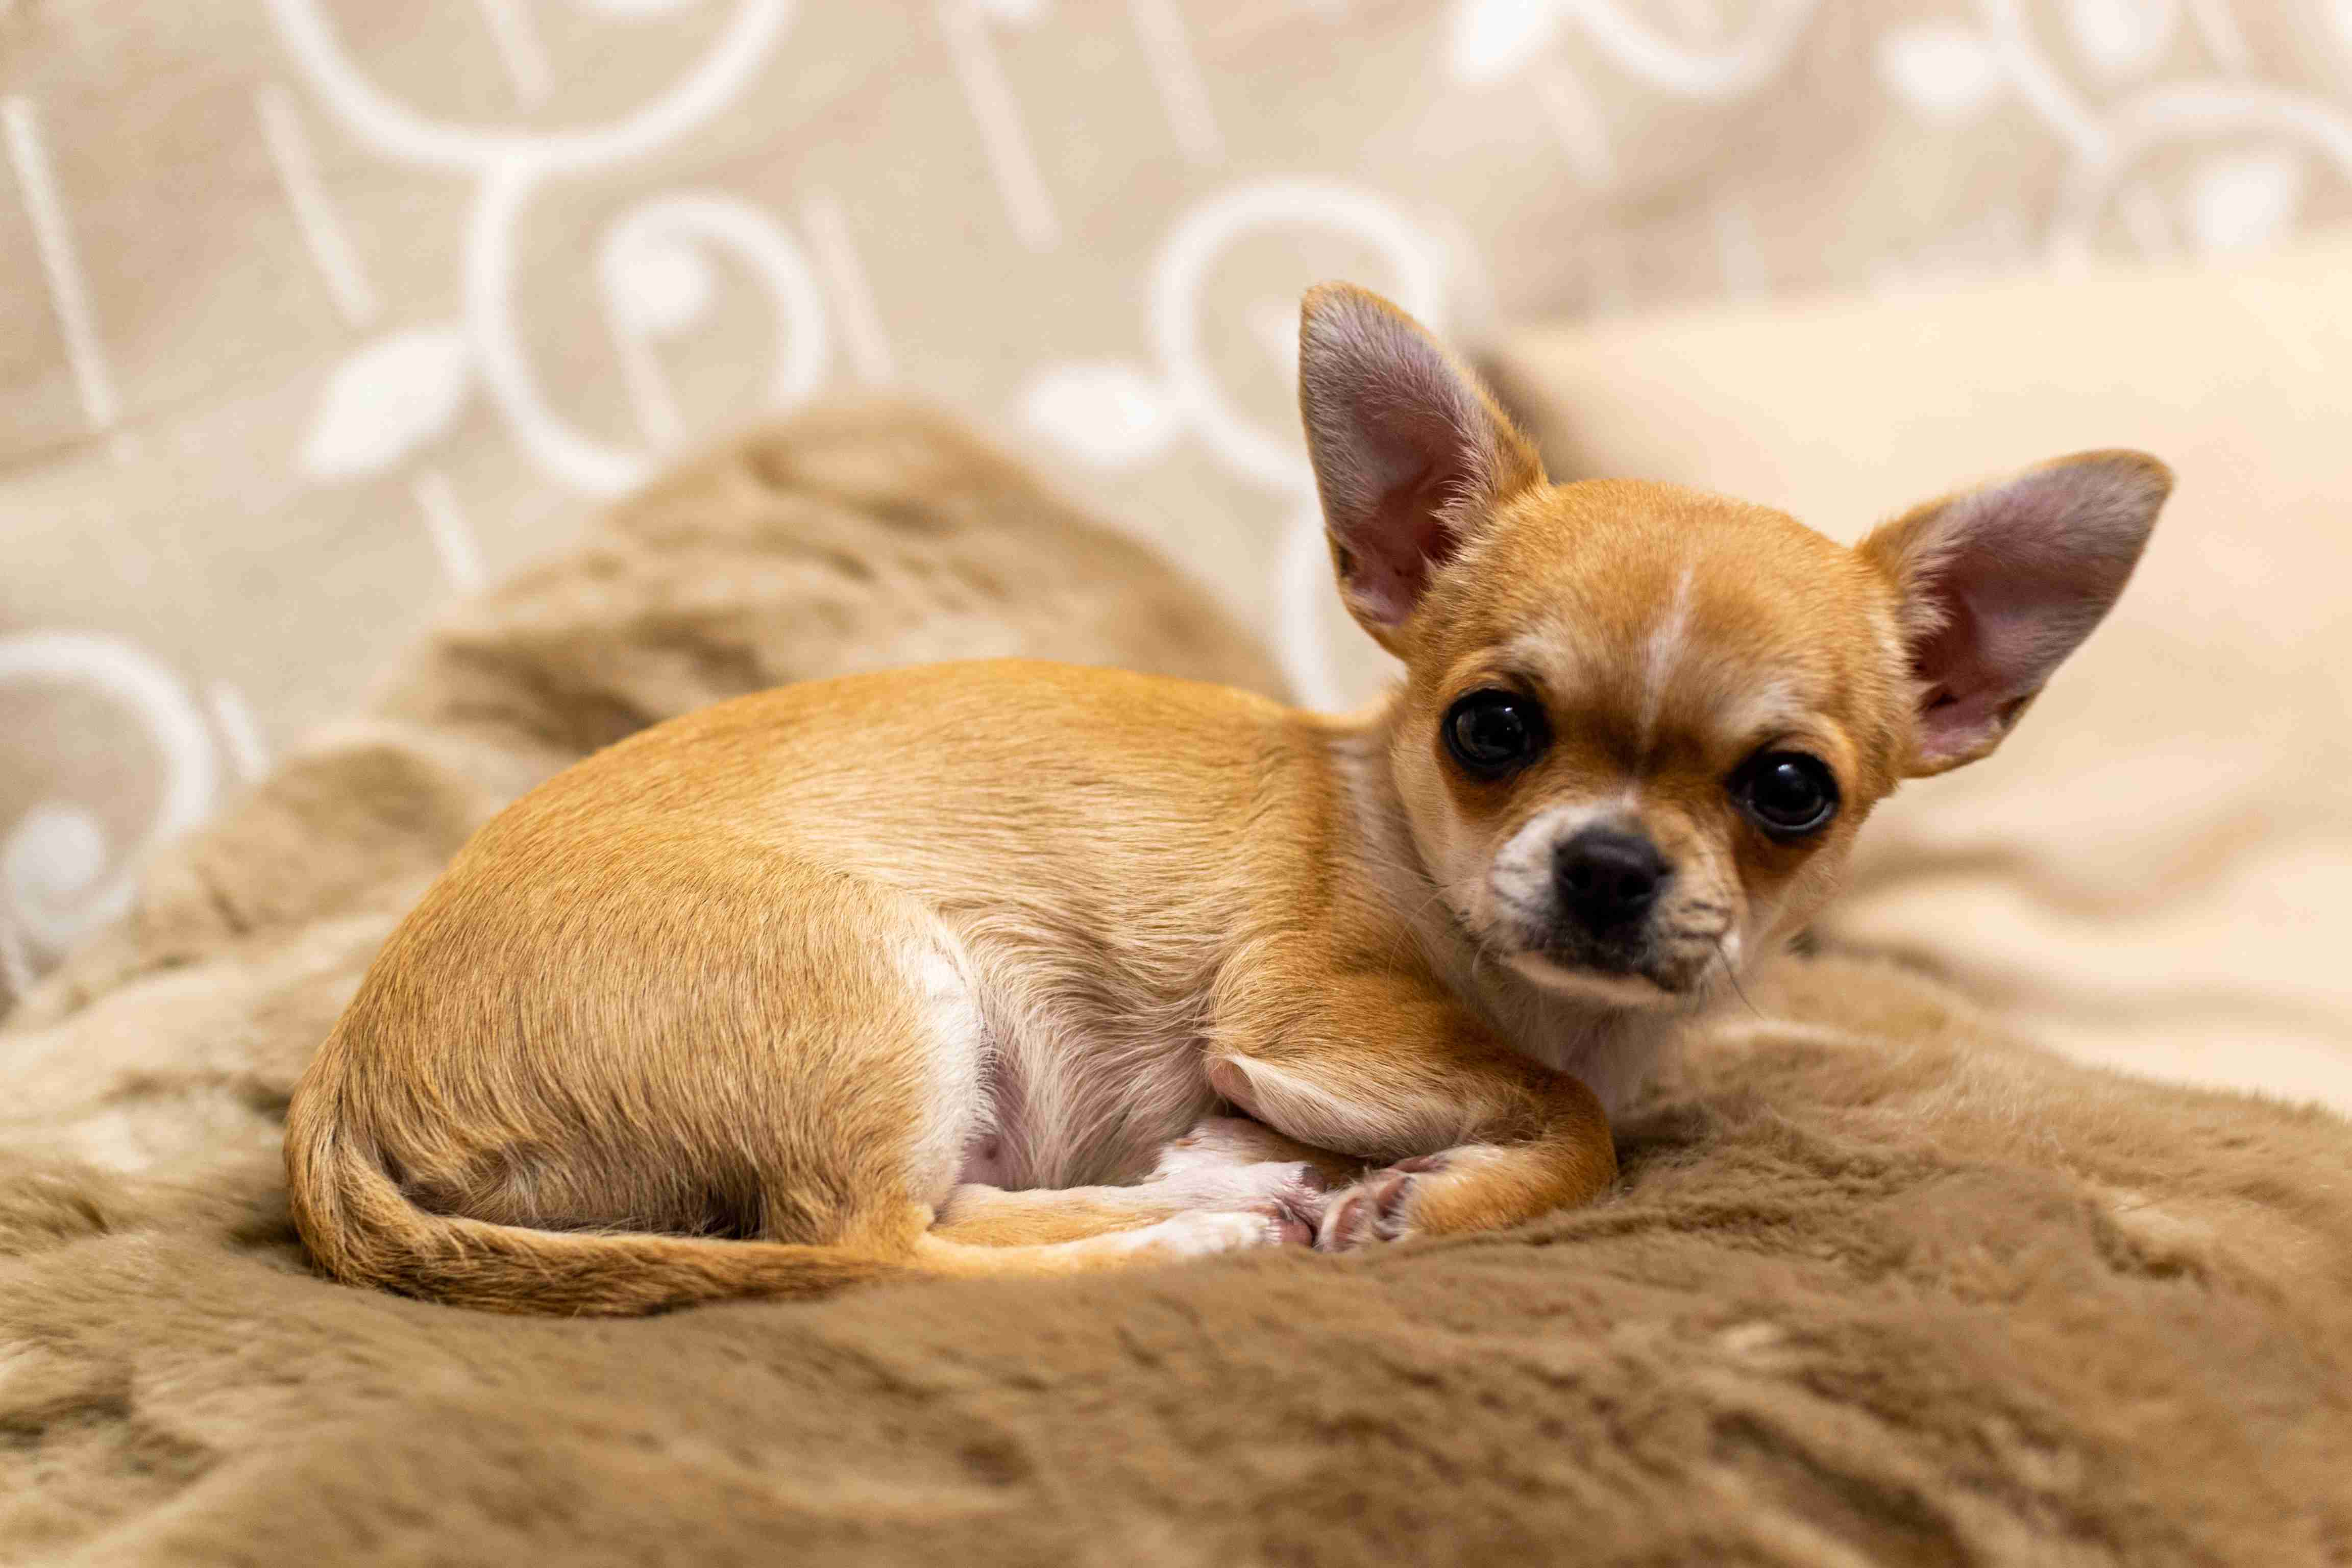 What are some common mistakes that Chihuahua owners make when dealing with anger issues?